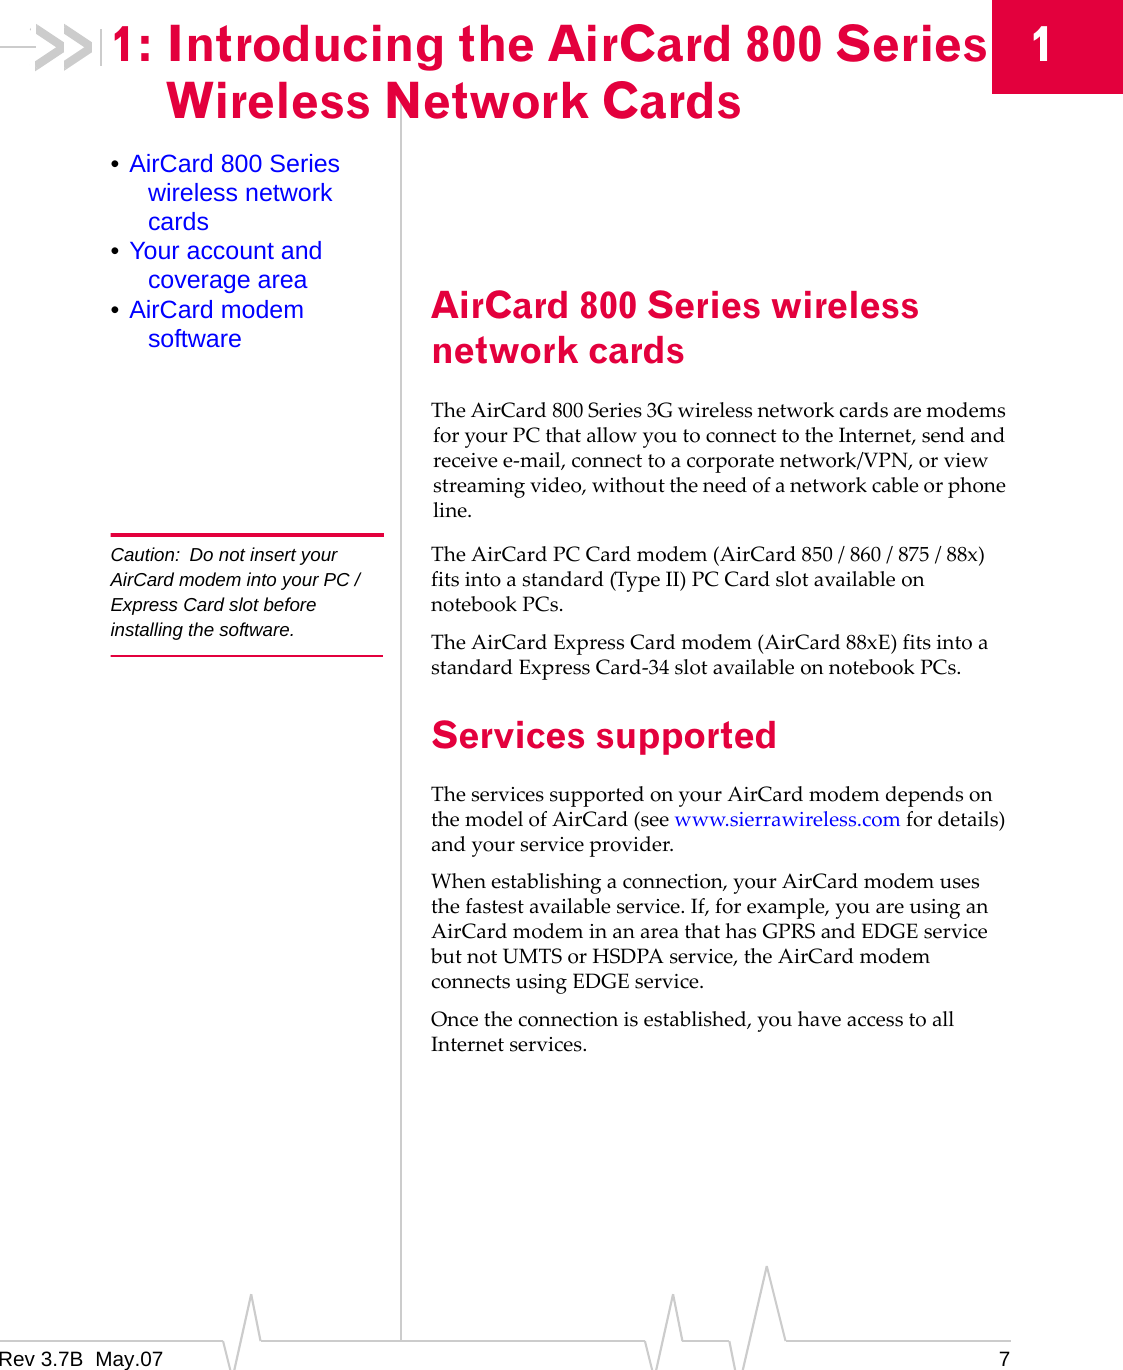 Rev 3.7B  May.07 711: Introducing the AirCard 800 Series Wireless Network Cards•AirCard 800 Series wireless network cards•Your account and coverage area•AirCard modem software AirCard 800 Series wireless network cardsTheAirCard 800Series3GwirelessnetworkcardsaremodemsforyourPCthatallowyoutoconnecttotheInternet,sendandreceivee‐mail,connecttoacorporatenetwork/VPN,orviewstreamingvideo,withouttheneedofanetworkcableorphoneline.Caution: Do not insert your AirCard modem into your PC /Express Card slot before installing the software.TheAirCardPCCardmodem(AirCard850/860/875/88x)fitsintoastandard(TypeII)PCCardslotavailableonnotebookPCs.TheAirCardExpressCardmodem(AirCard88xE)fitsintoastandardExpressCard‐34slotavailableonnotebookPCs.Services supportedTheservicessupportedonyourAirCardmodemdependsonthemodelofAirCard(seewww.sierrawireless.comfordetails)andyourserviceprovider.Whenestablishingaconnection,yourAirCardmodemusesthefastestavailableservice.If,forexample,youareusinganAirCardmodeminanareathathasGPRSandEDGEservicebutnotUMTSorHSDPAservice,theAirCardmodemconnectsusingEDGEservice.Oncetheconnectionisestablished,youhaveaccesstoallInternetservices.